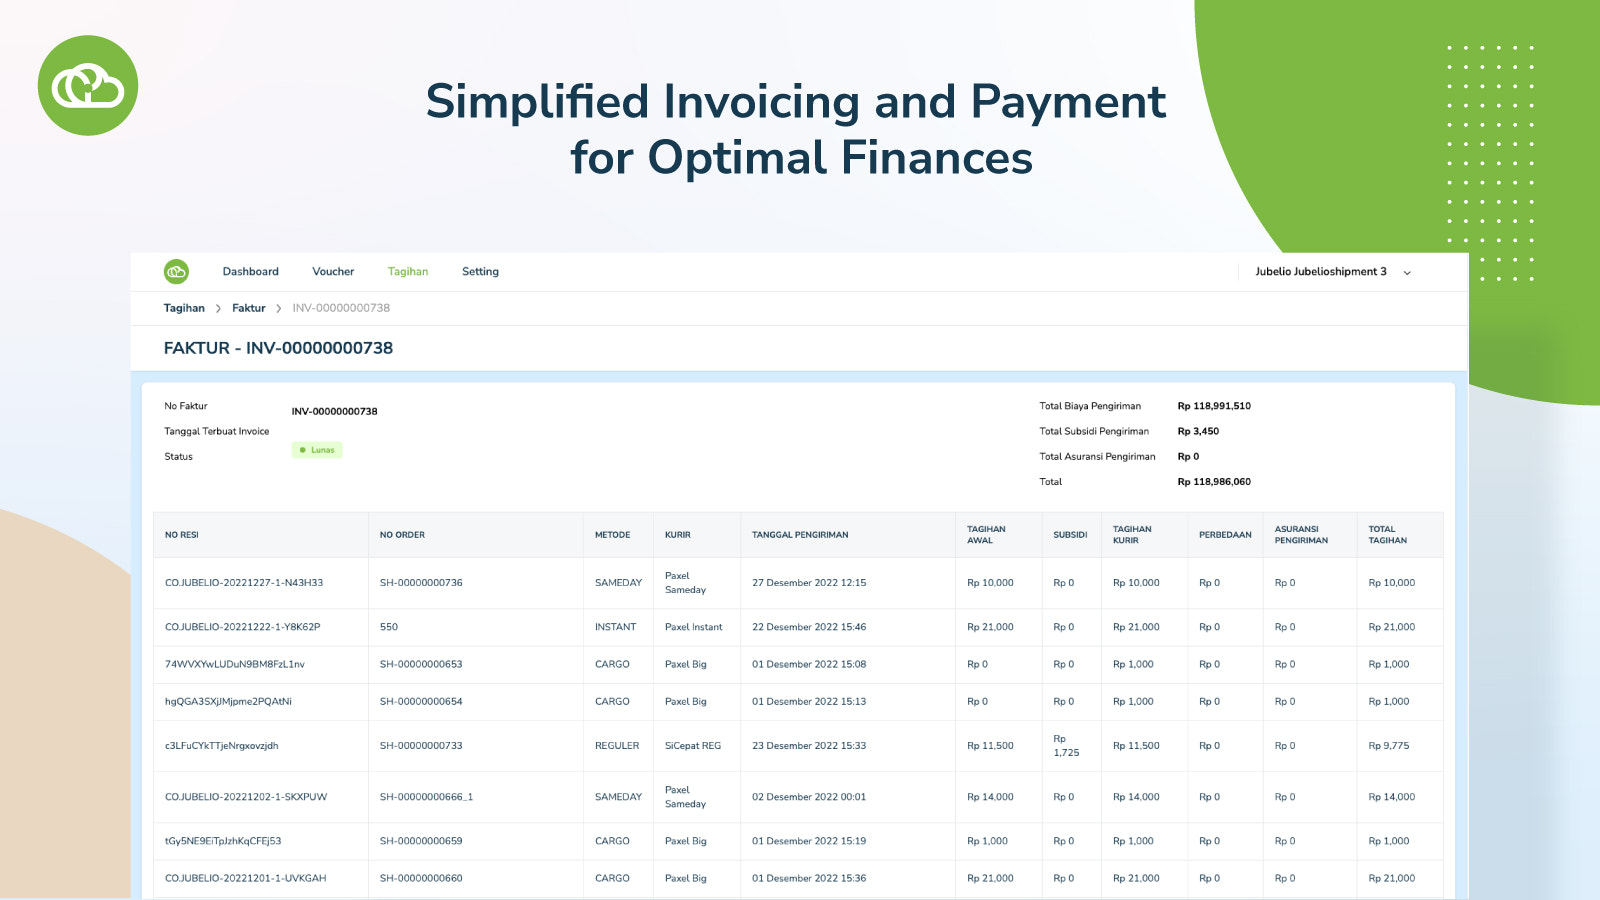 Simplified Invoicing and Payment for Optimal Finances